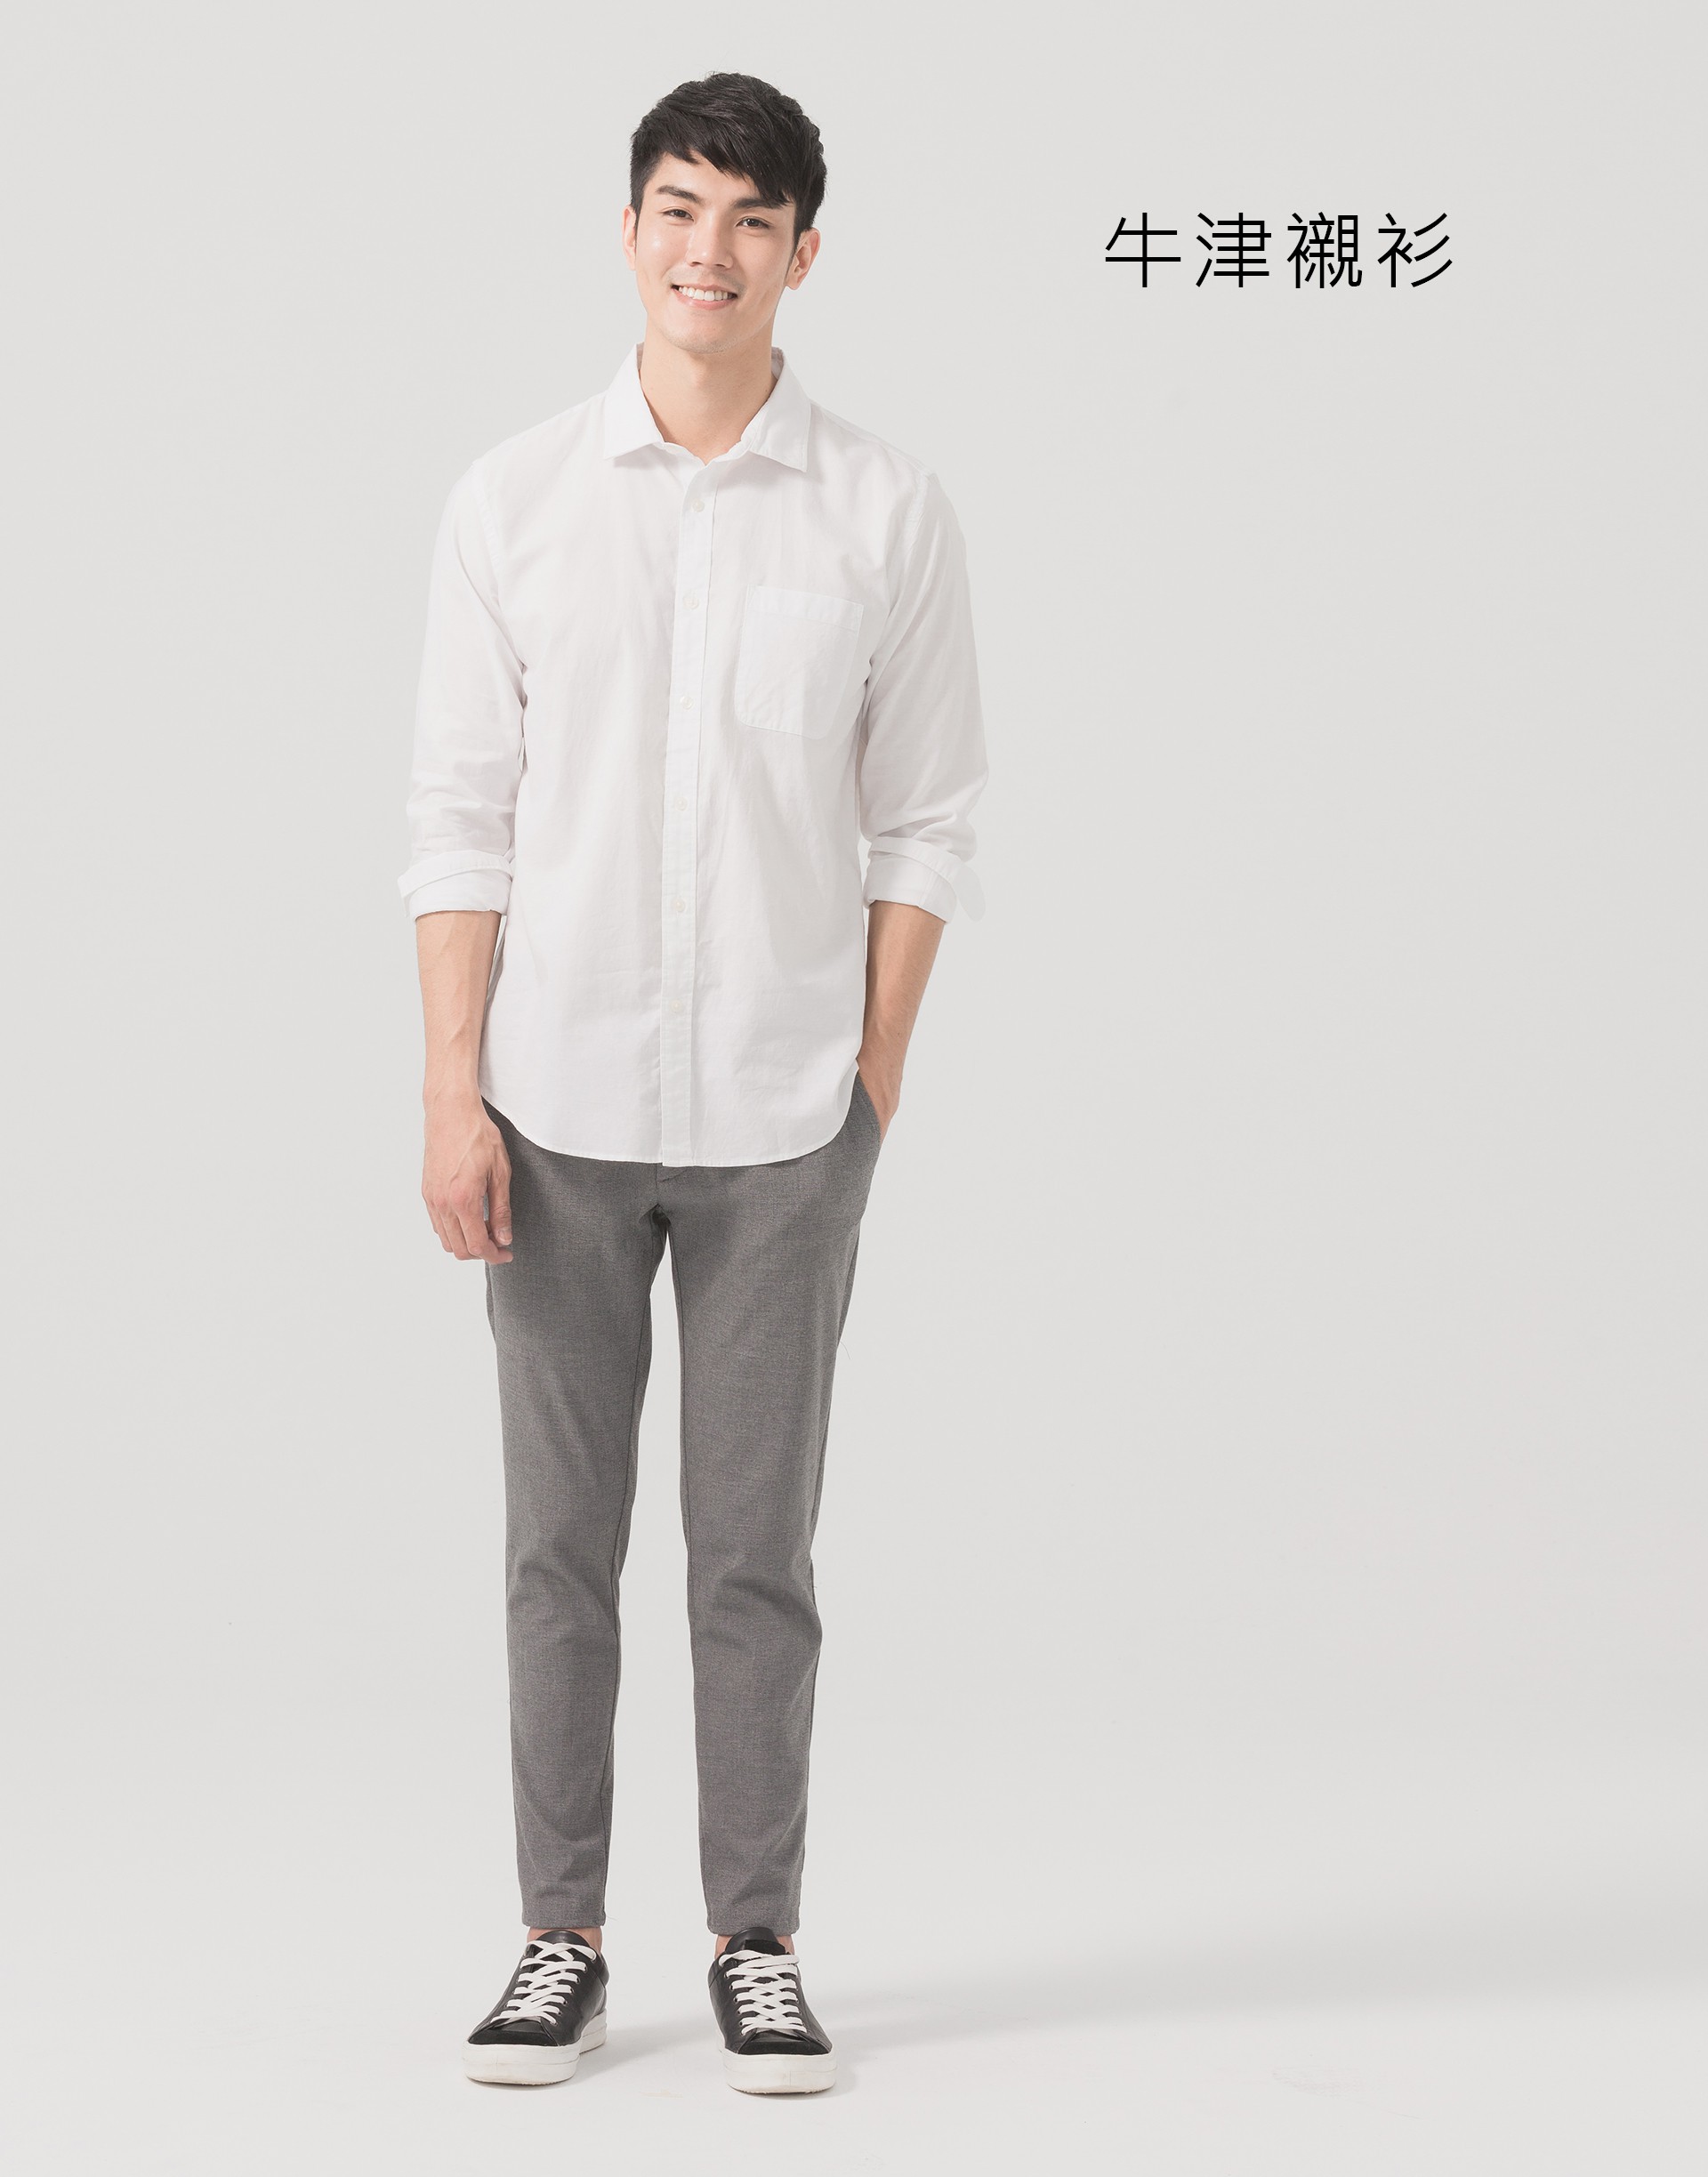 Buy Direct From Taiwan Genquo Oxford Long Sleeve Shirt 牛津布长袖衬衫 男on Ezbuy Sg